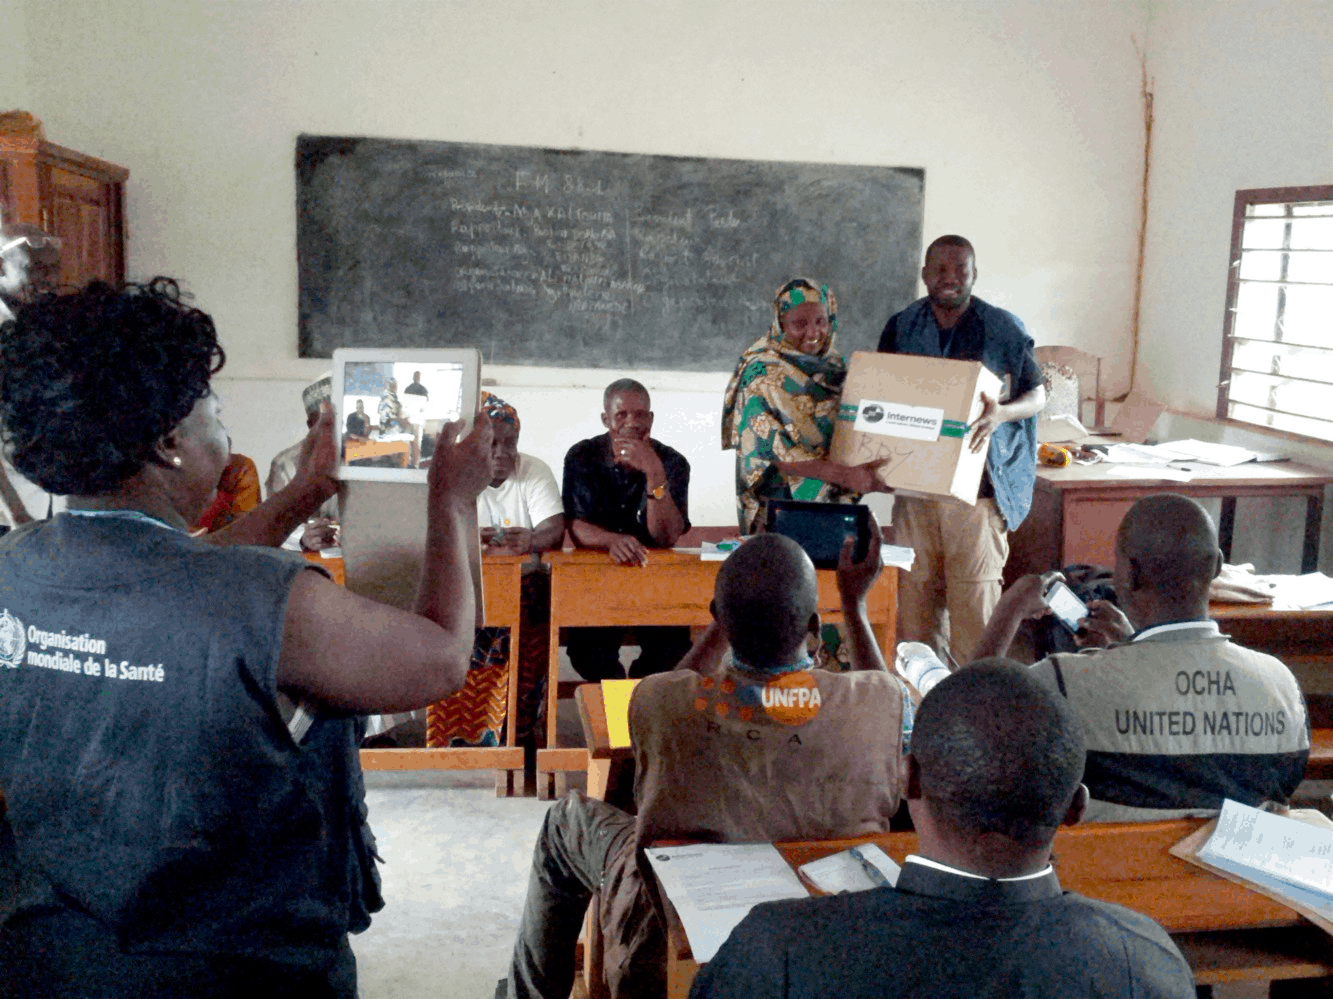 People sit in a classroom while a man hands over a box to a woman